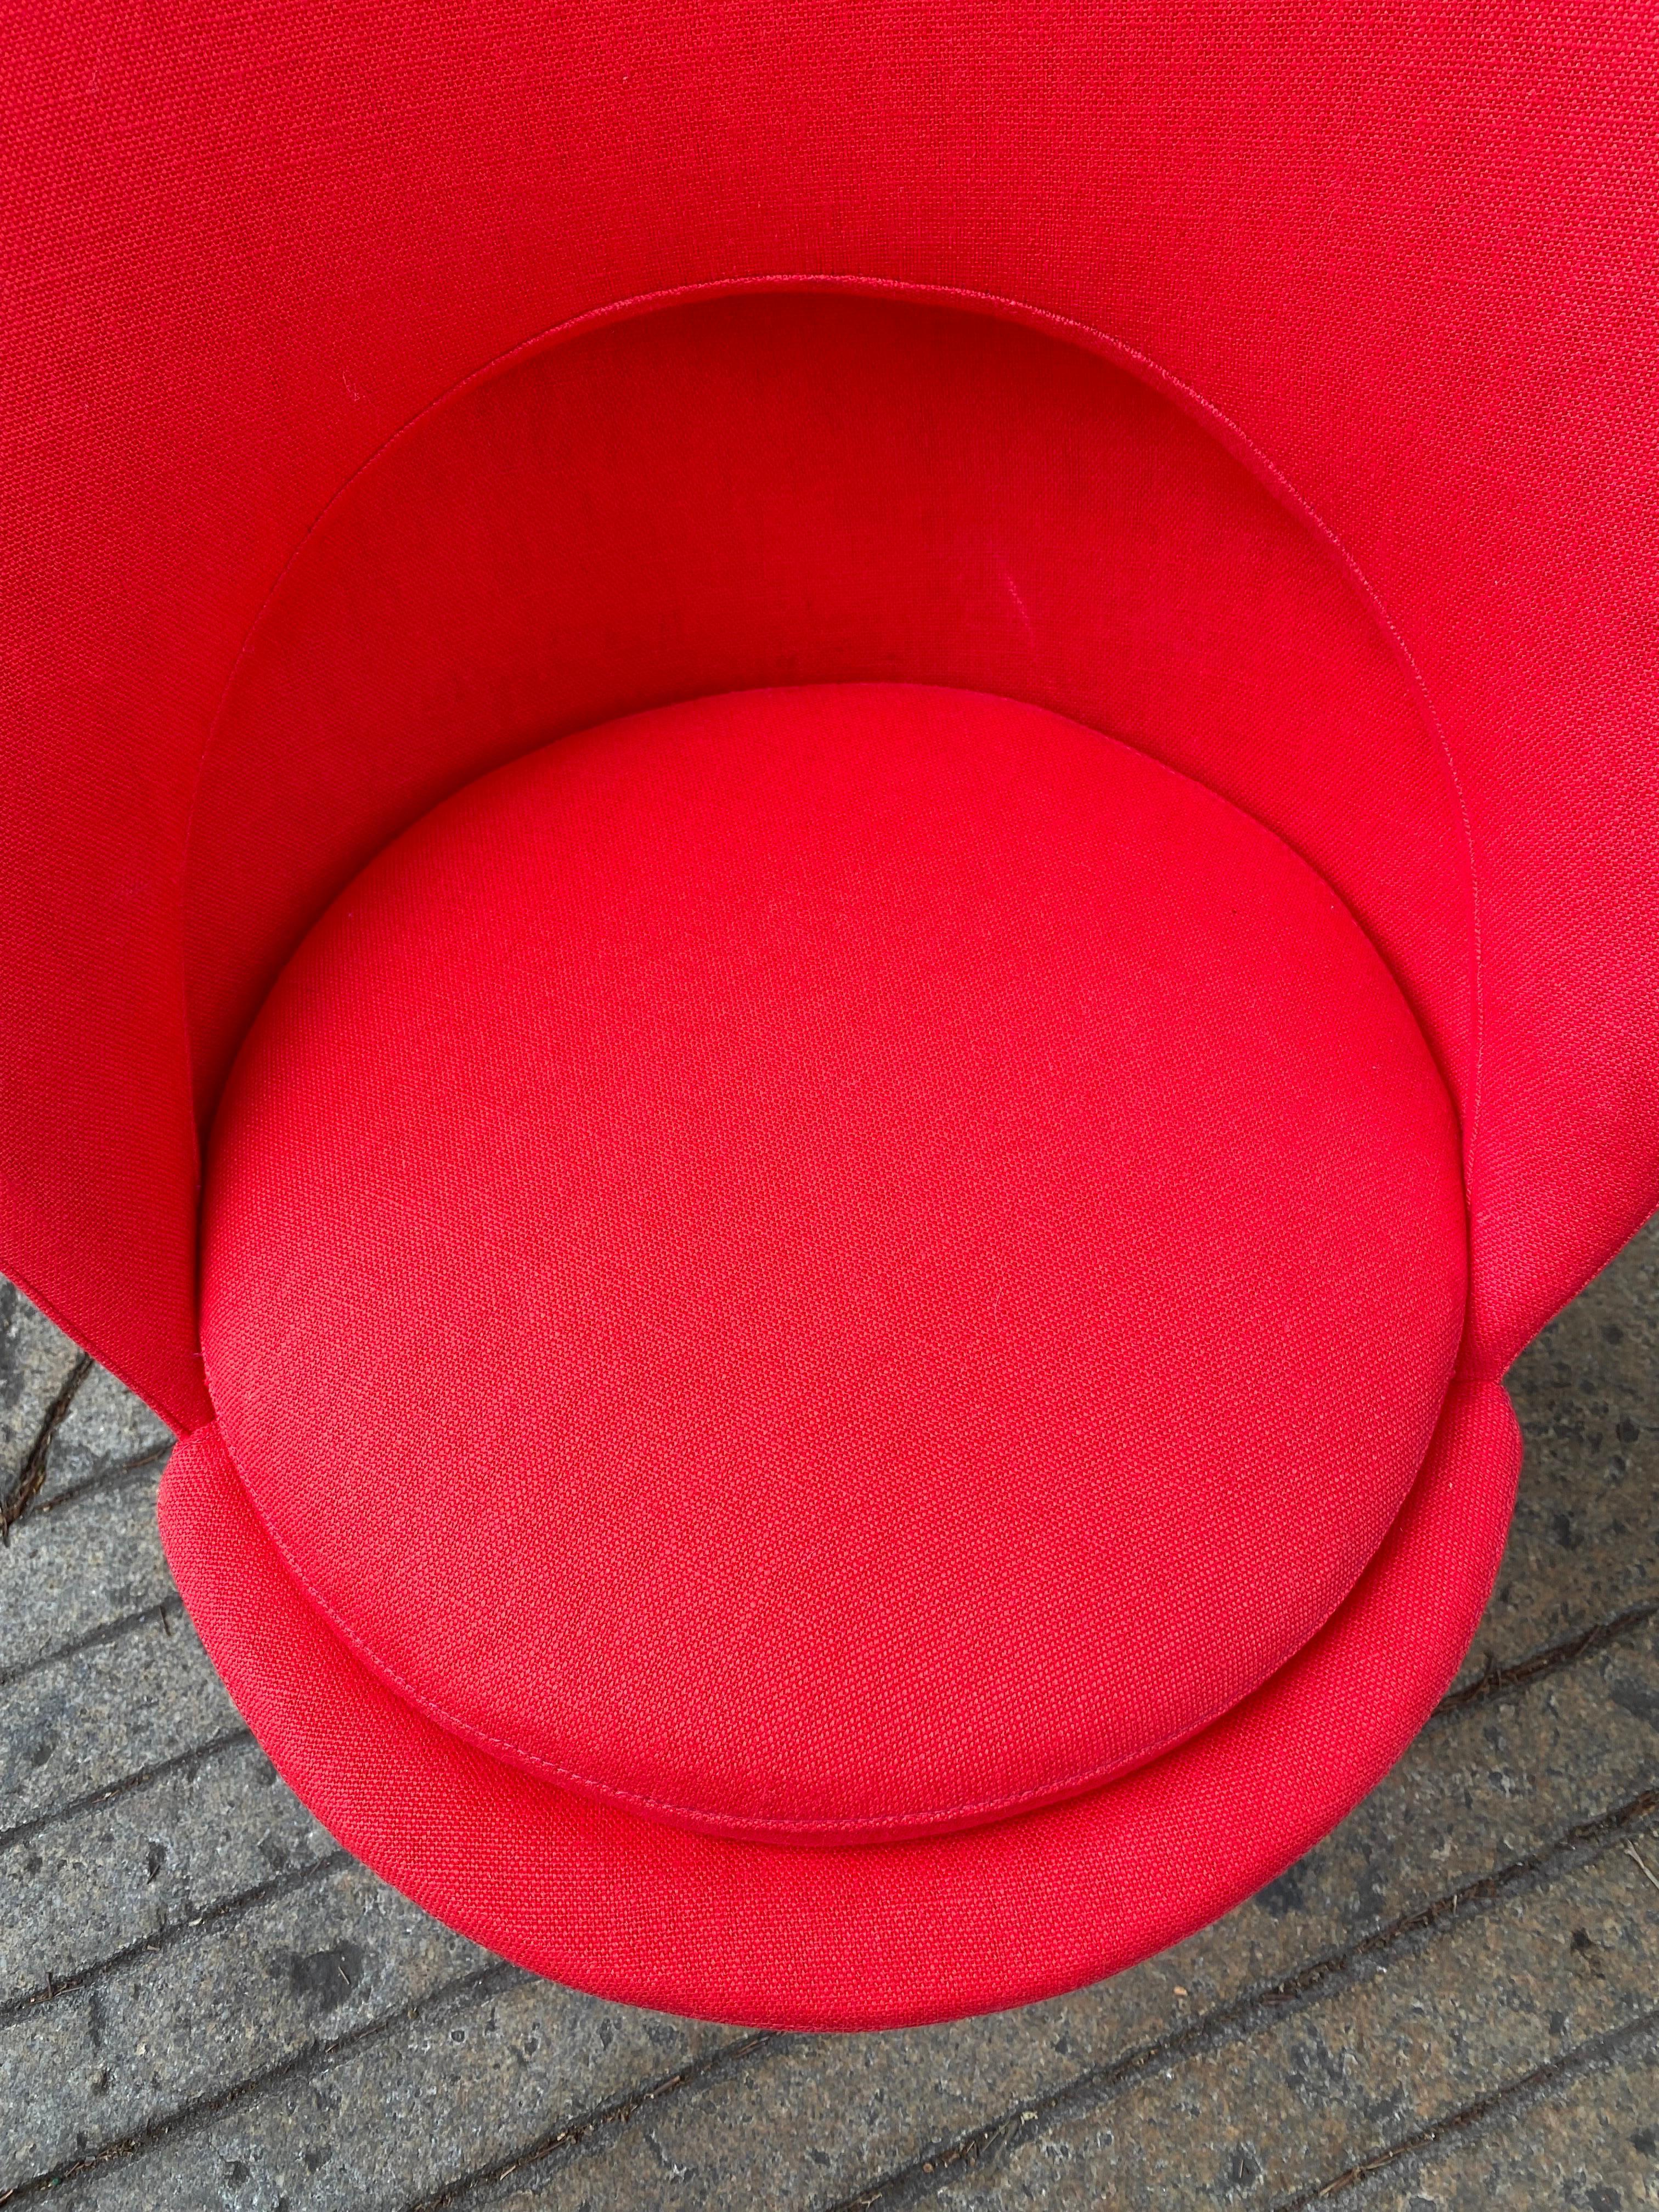 Danish Verner Panton Newly Reupholstered Cone Chair For Sale